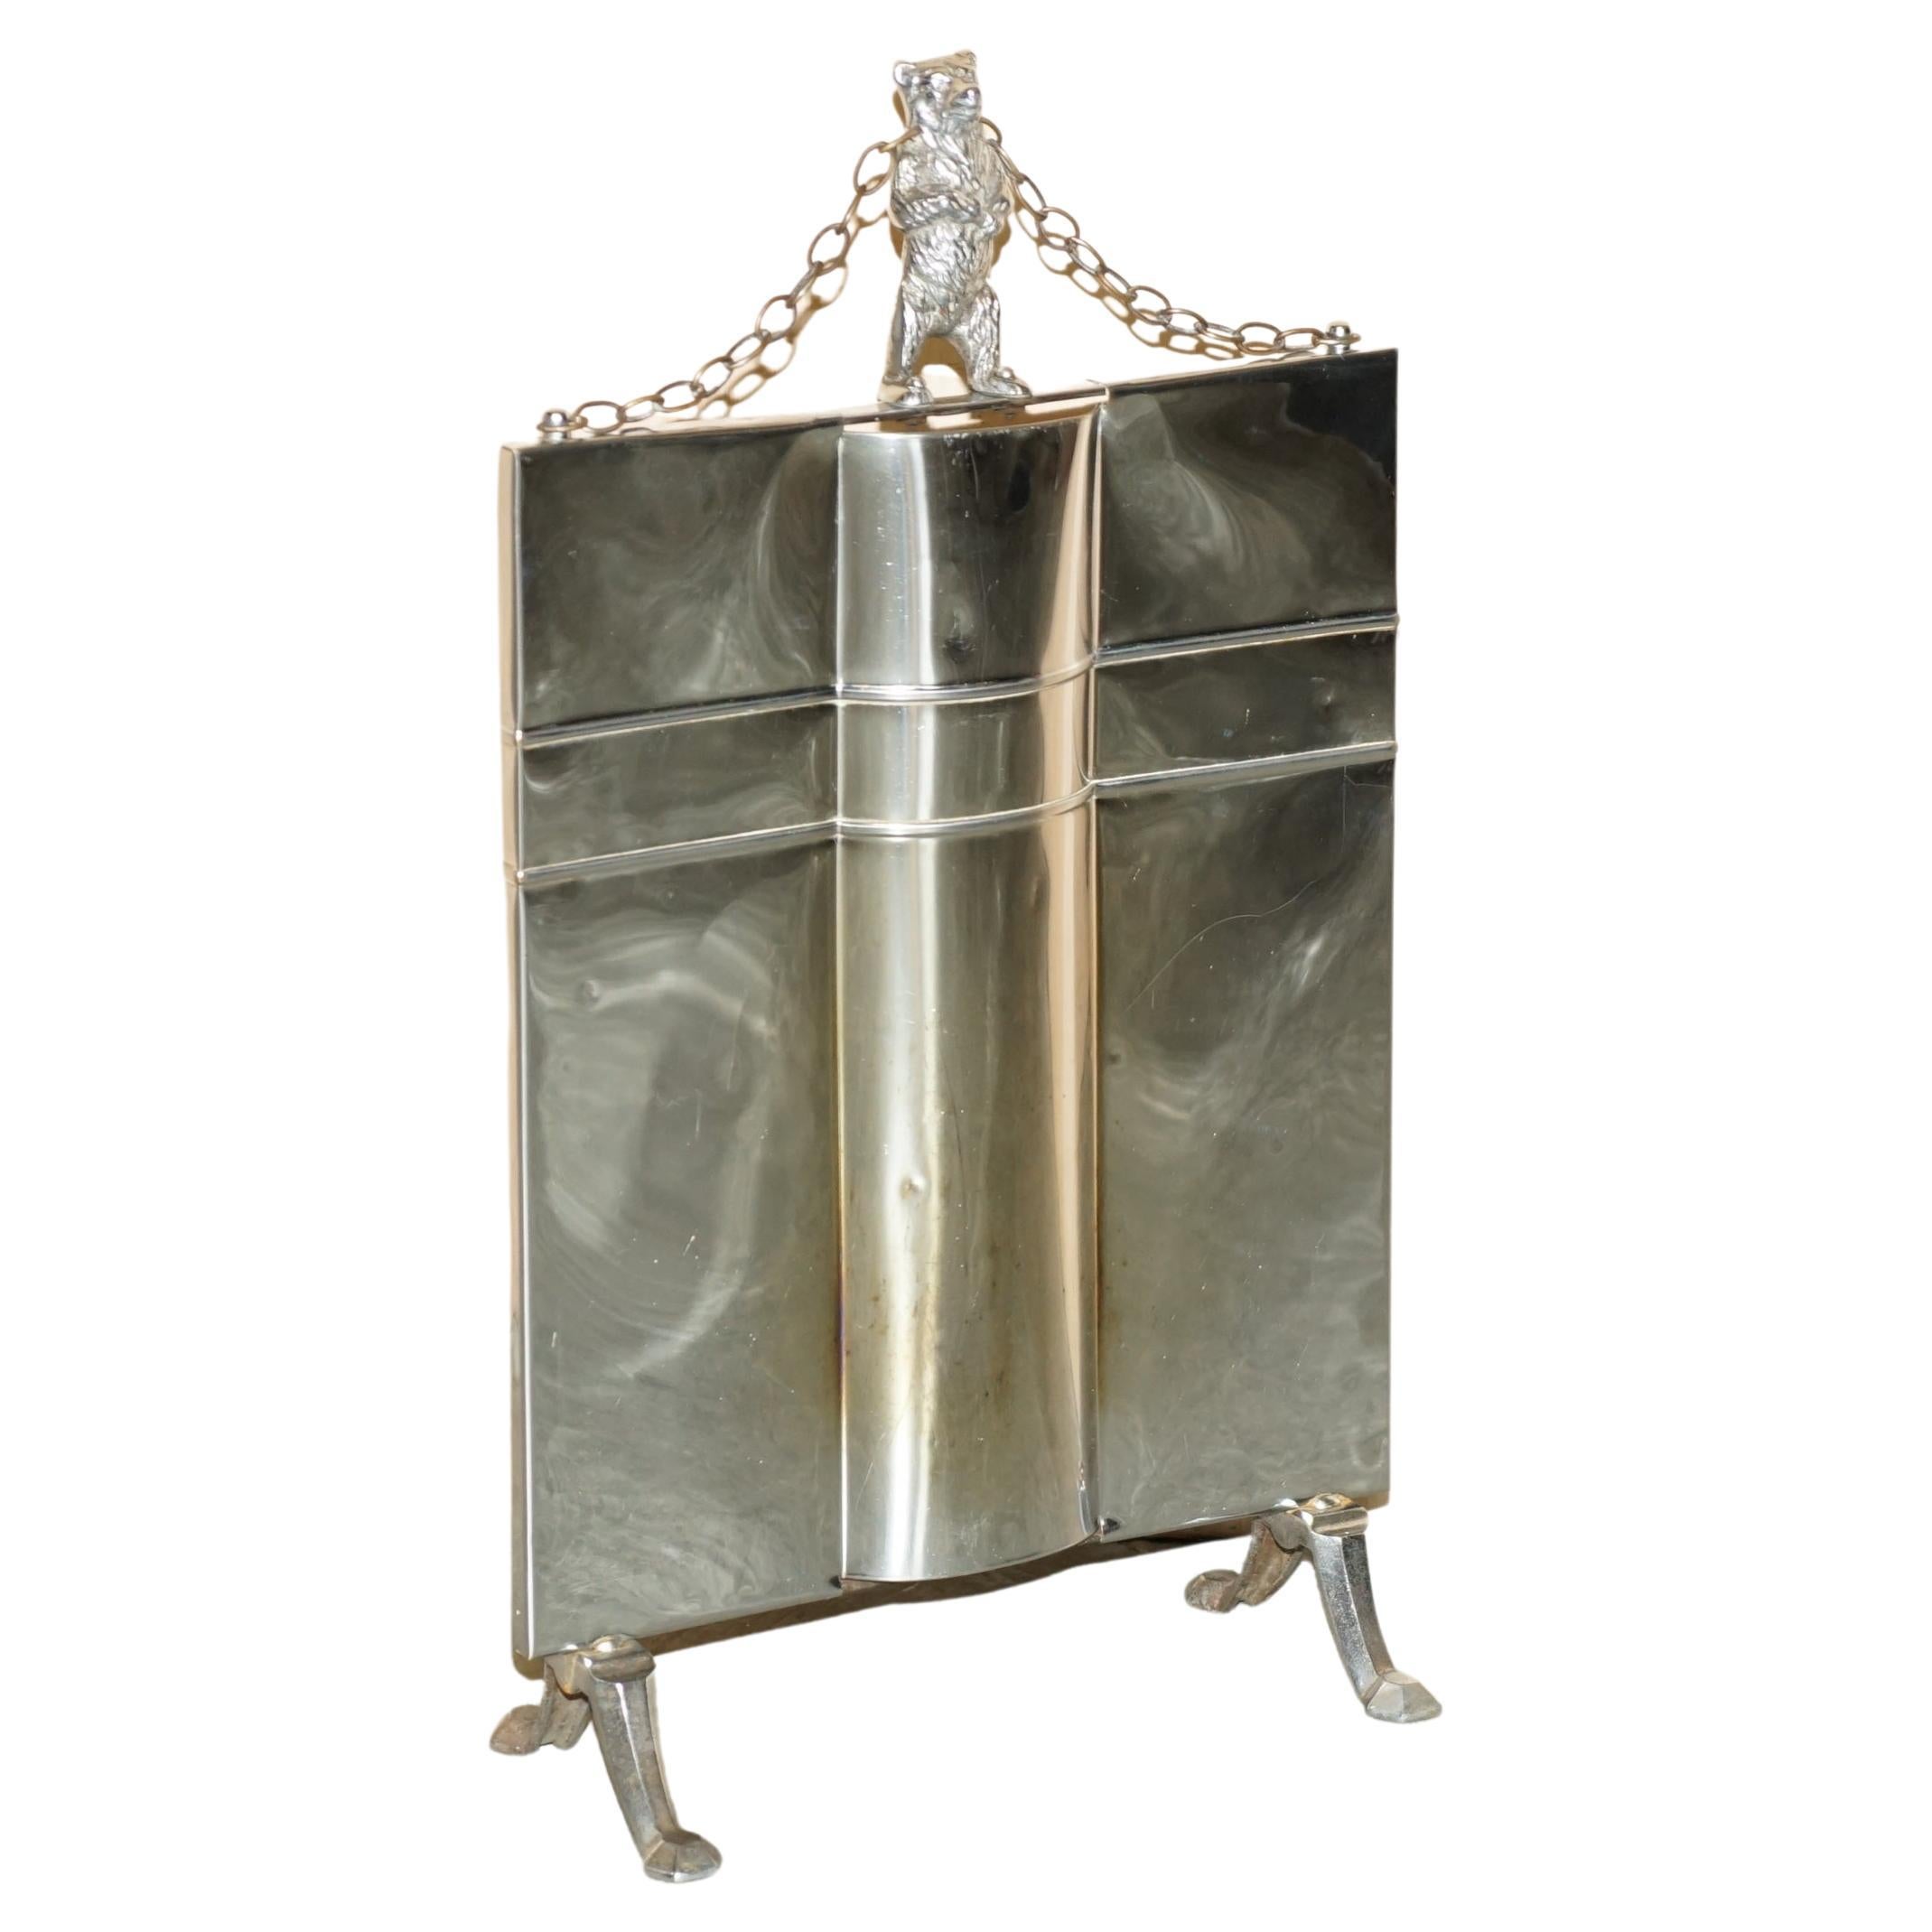 Royal House Antiques

Royal House Antiques is delighted to offer for sale this stunning circa 1920'S Art Deco polished chrome with Bear on top Fire Screen or Guard

A very good looking and well made piece, it is super decorative and looks attractive